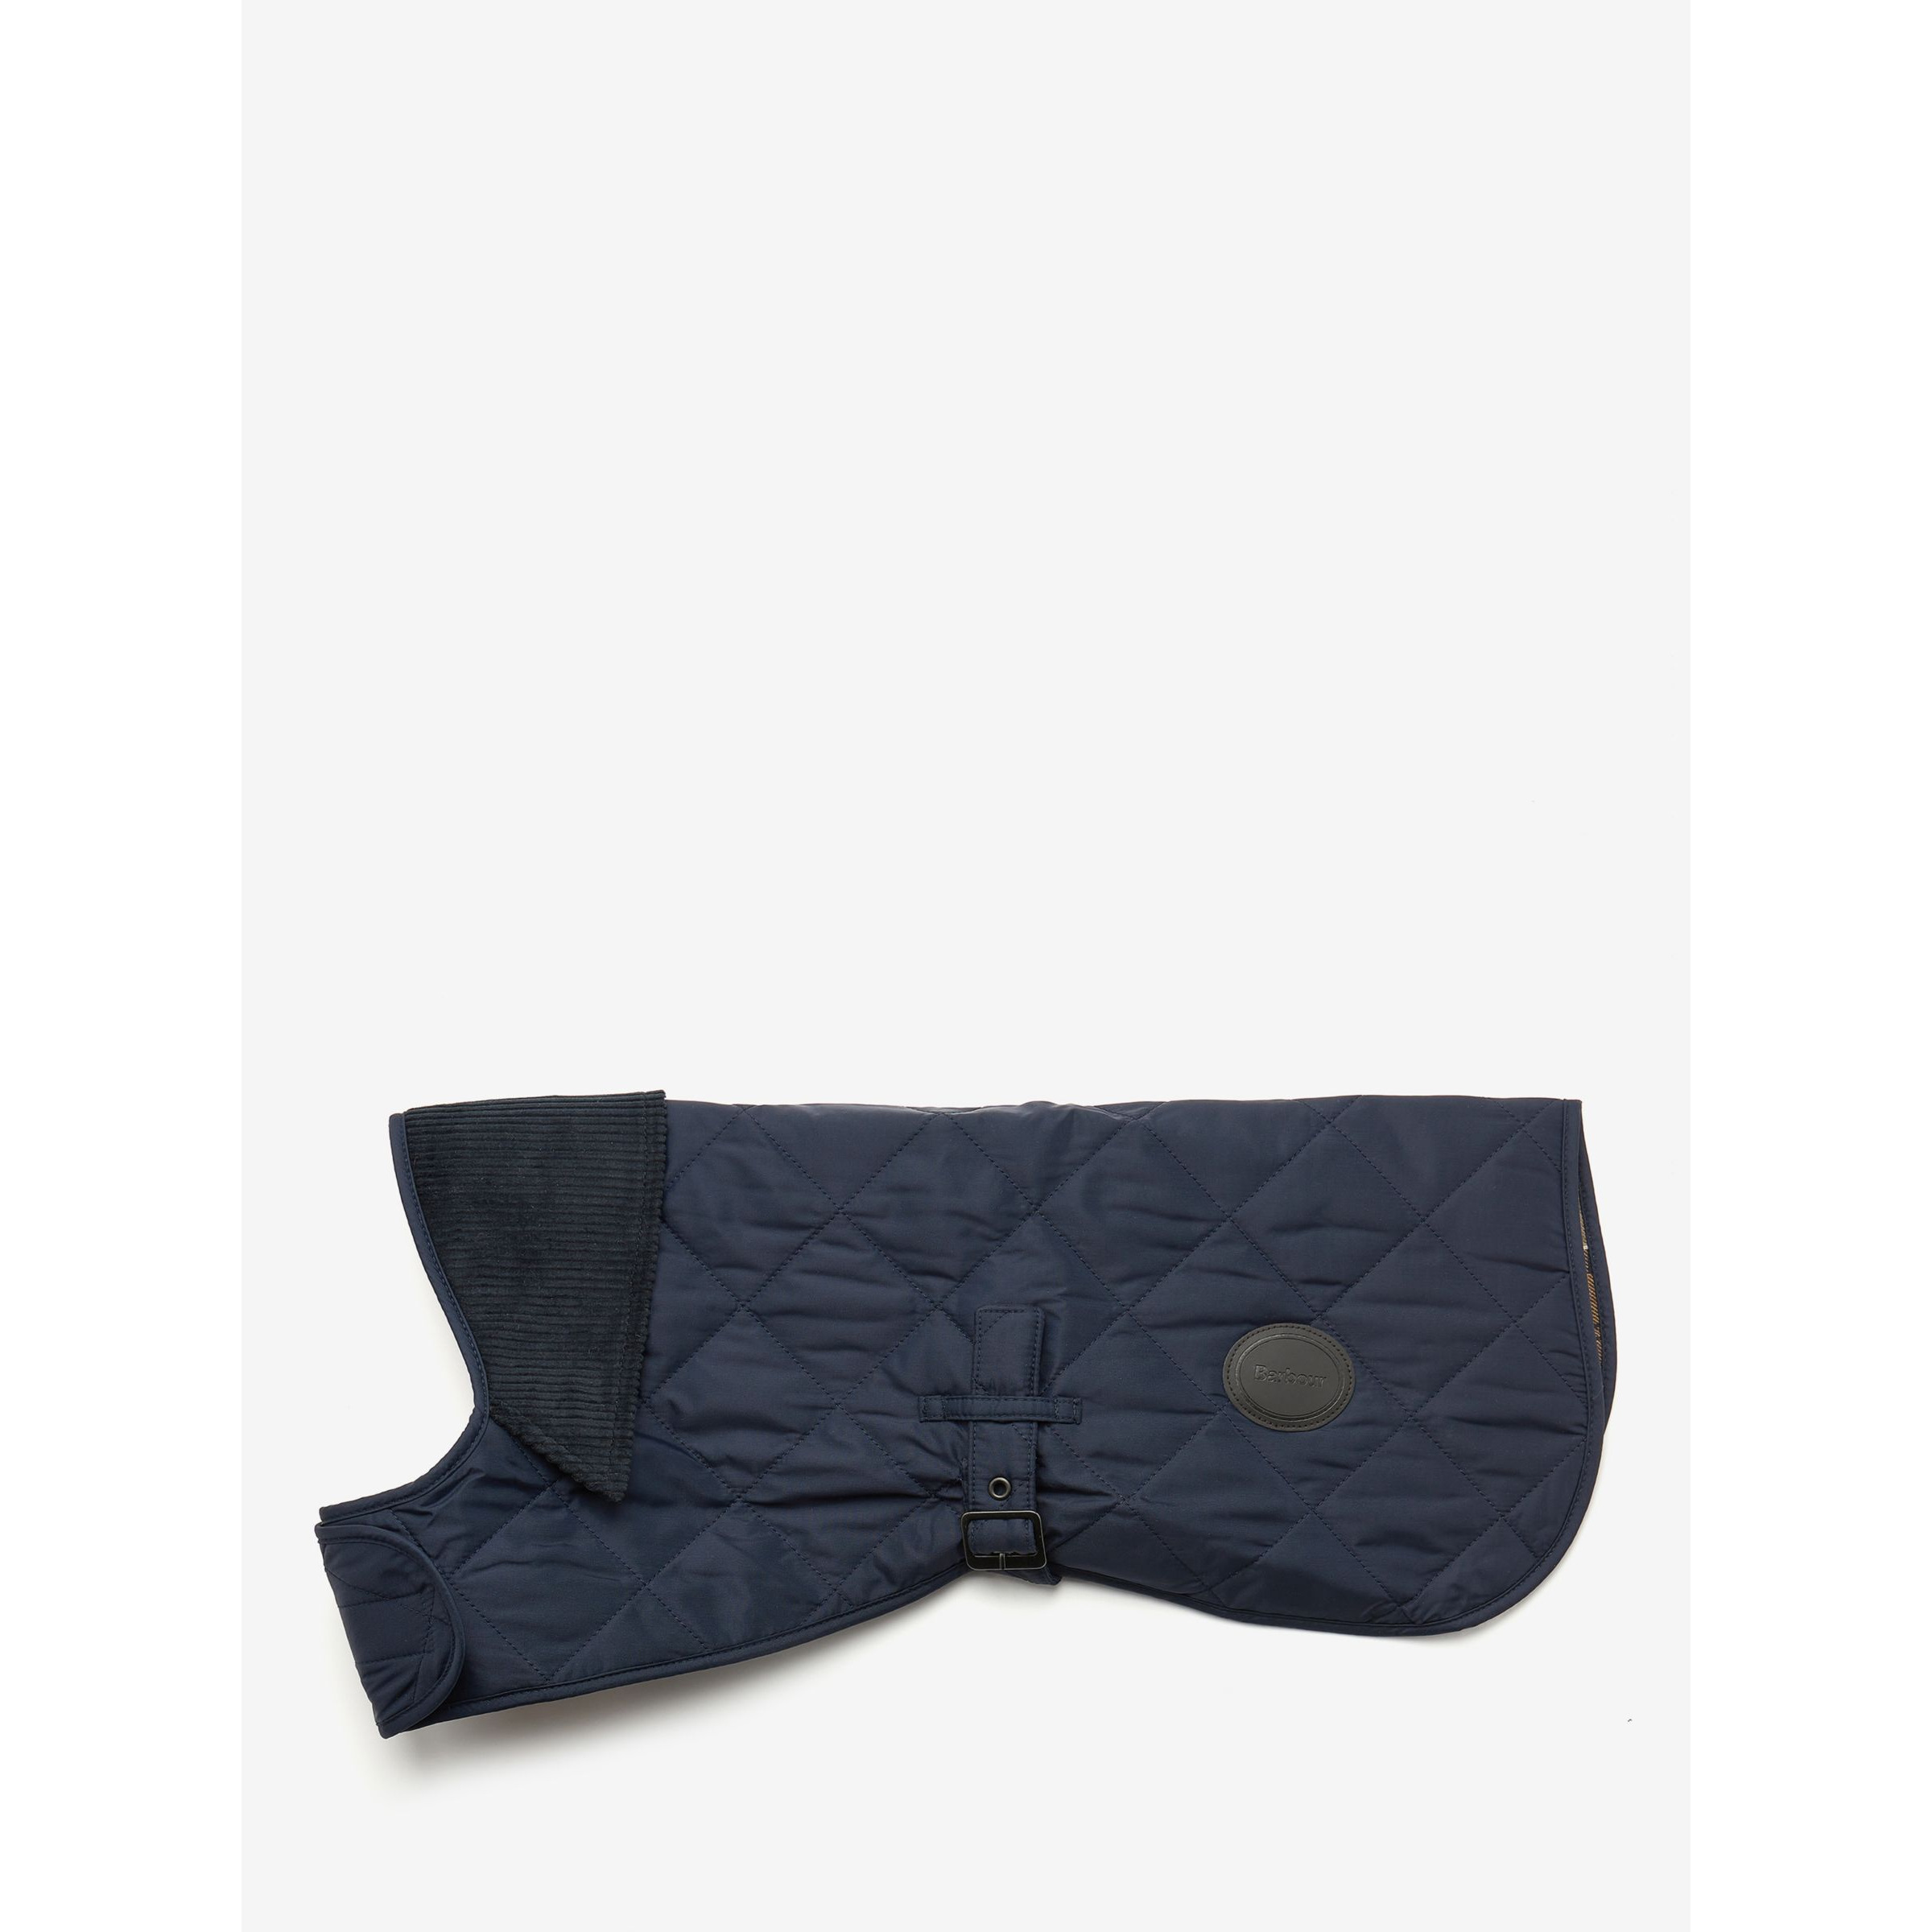 Barbour Quilted Dog Coat, Navy - image 1